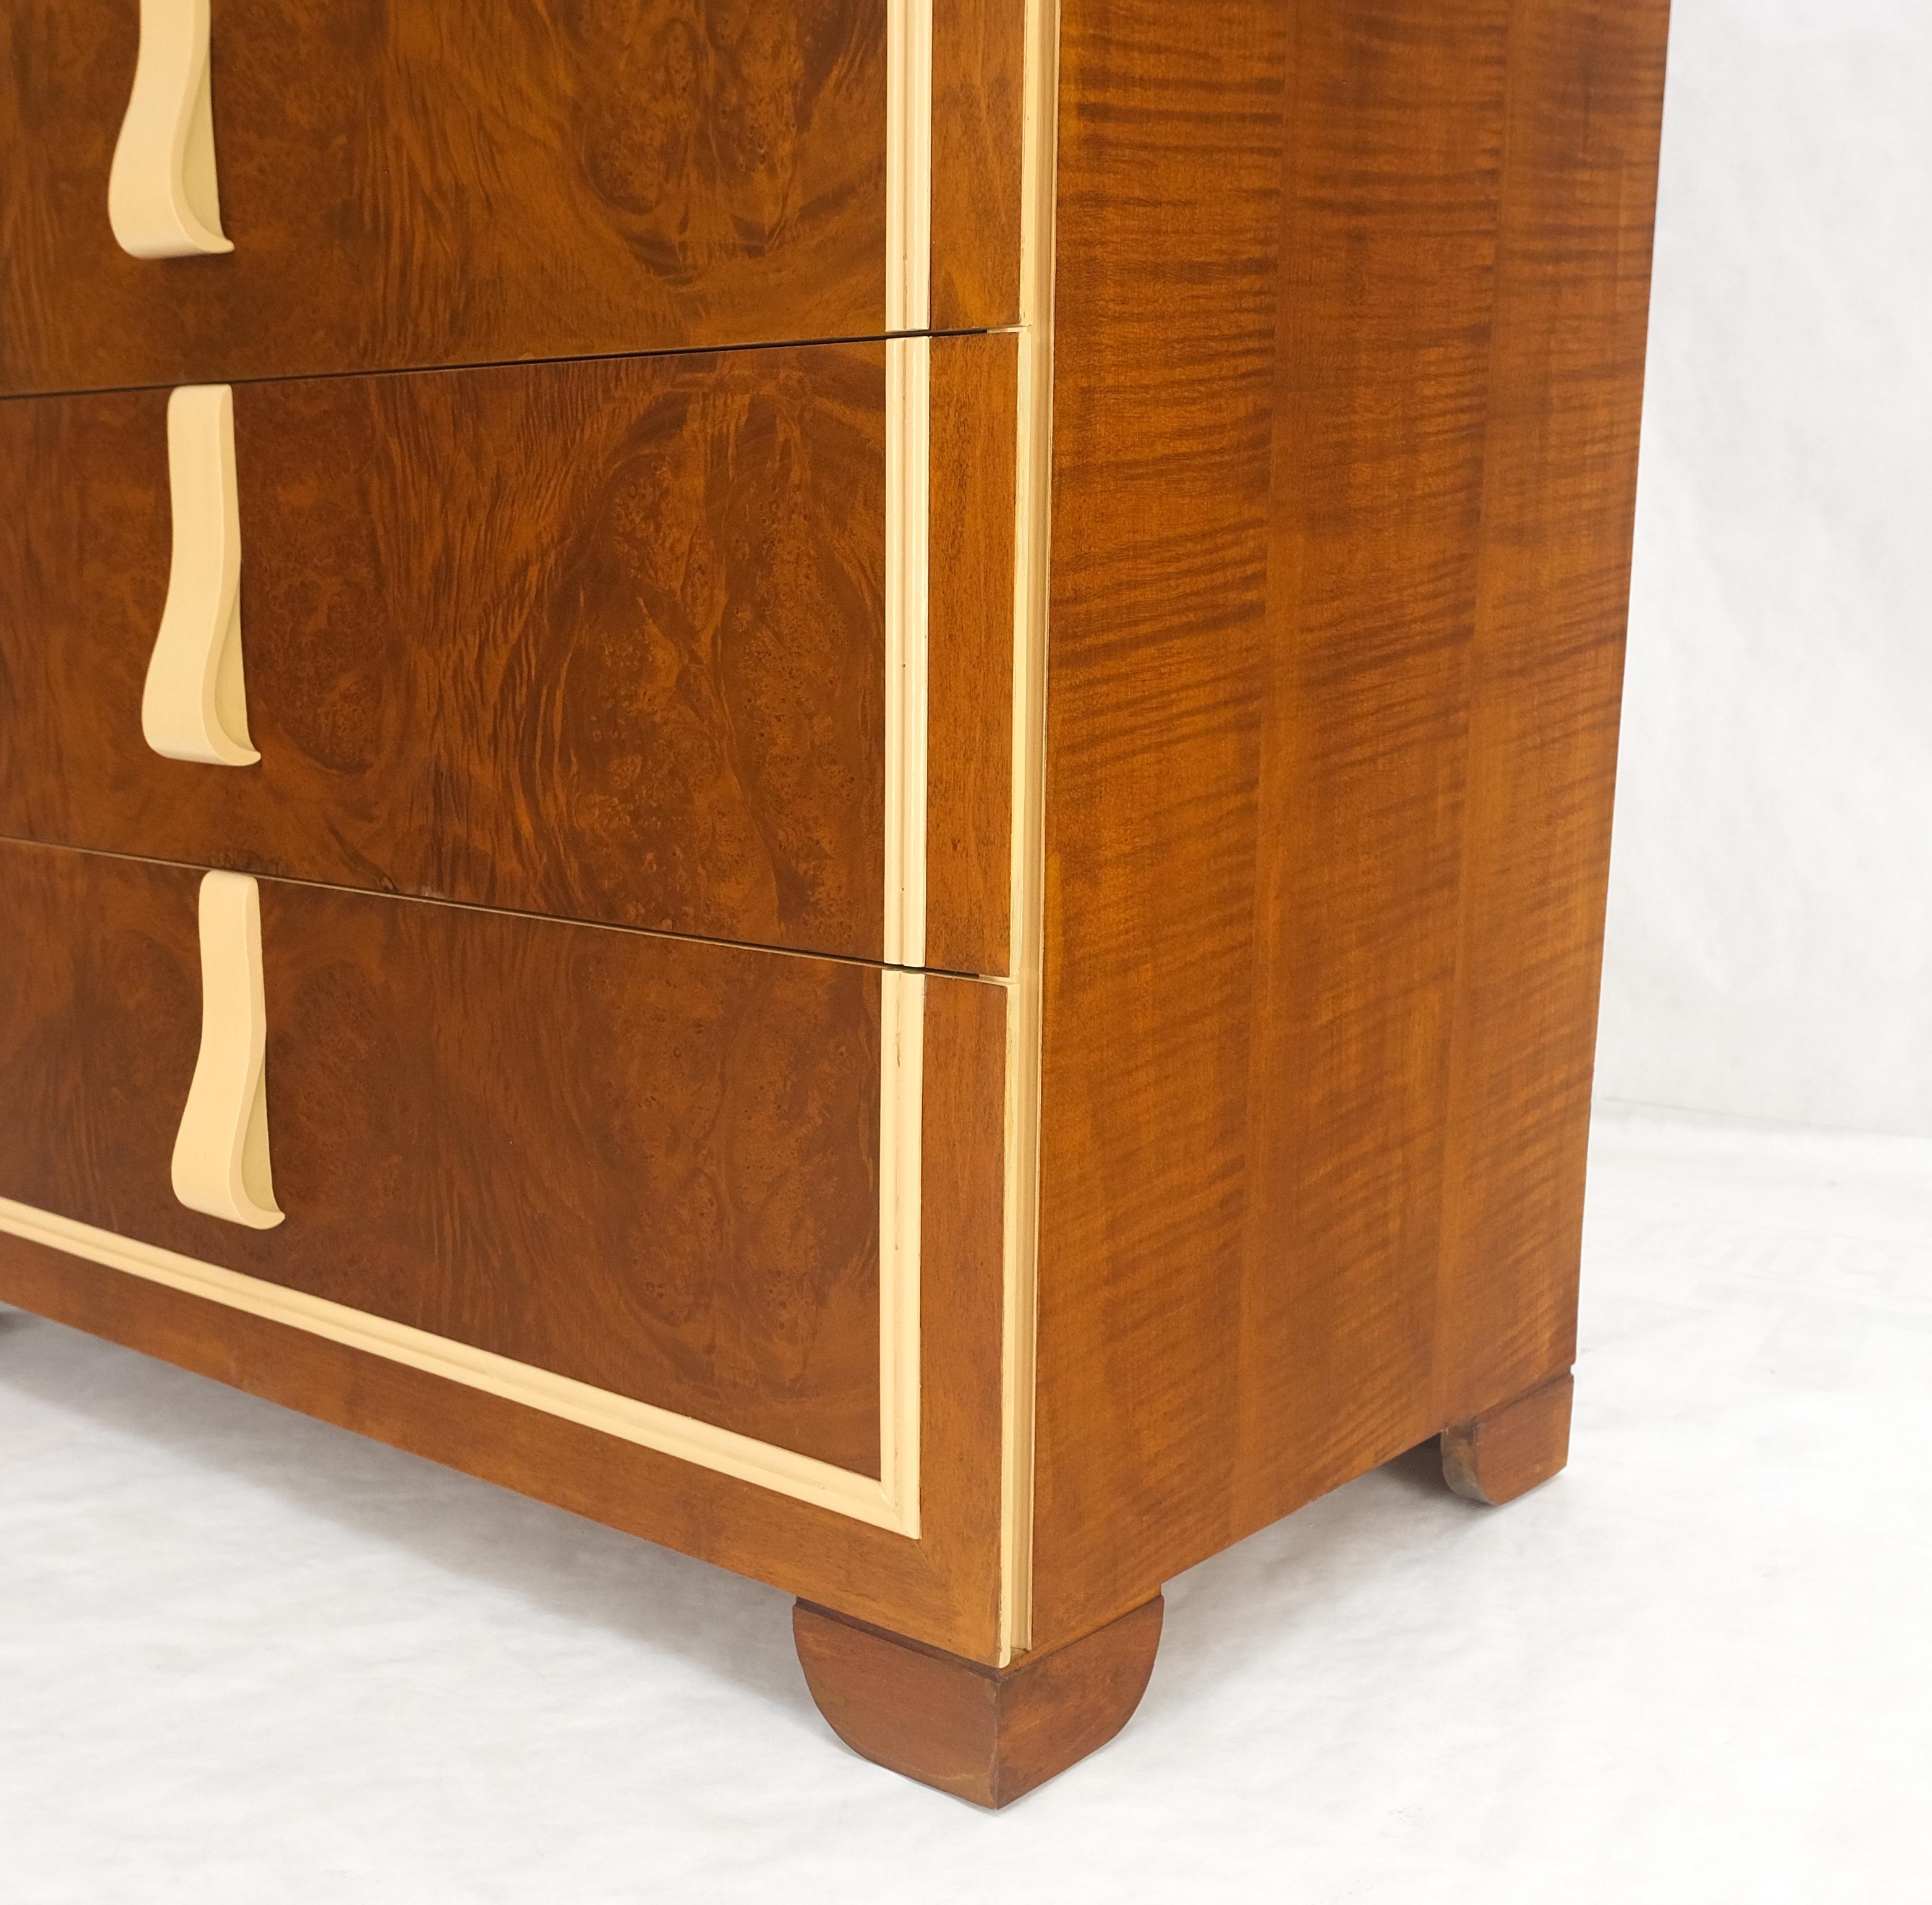 American Restored Art Deco Mid Century Burl Wood 5 Drawers Tall High Chest Dresser MINT! For Sale